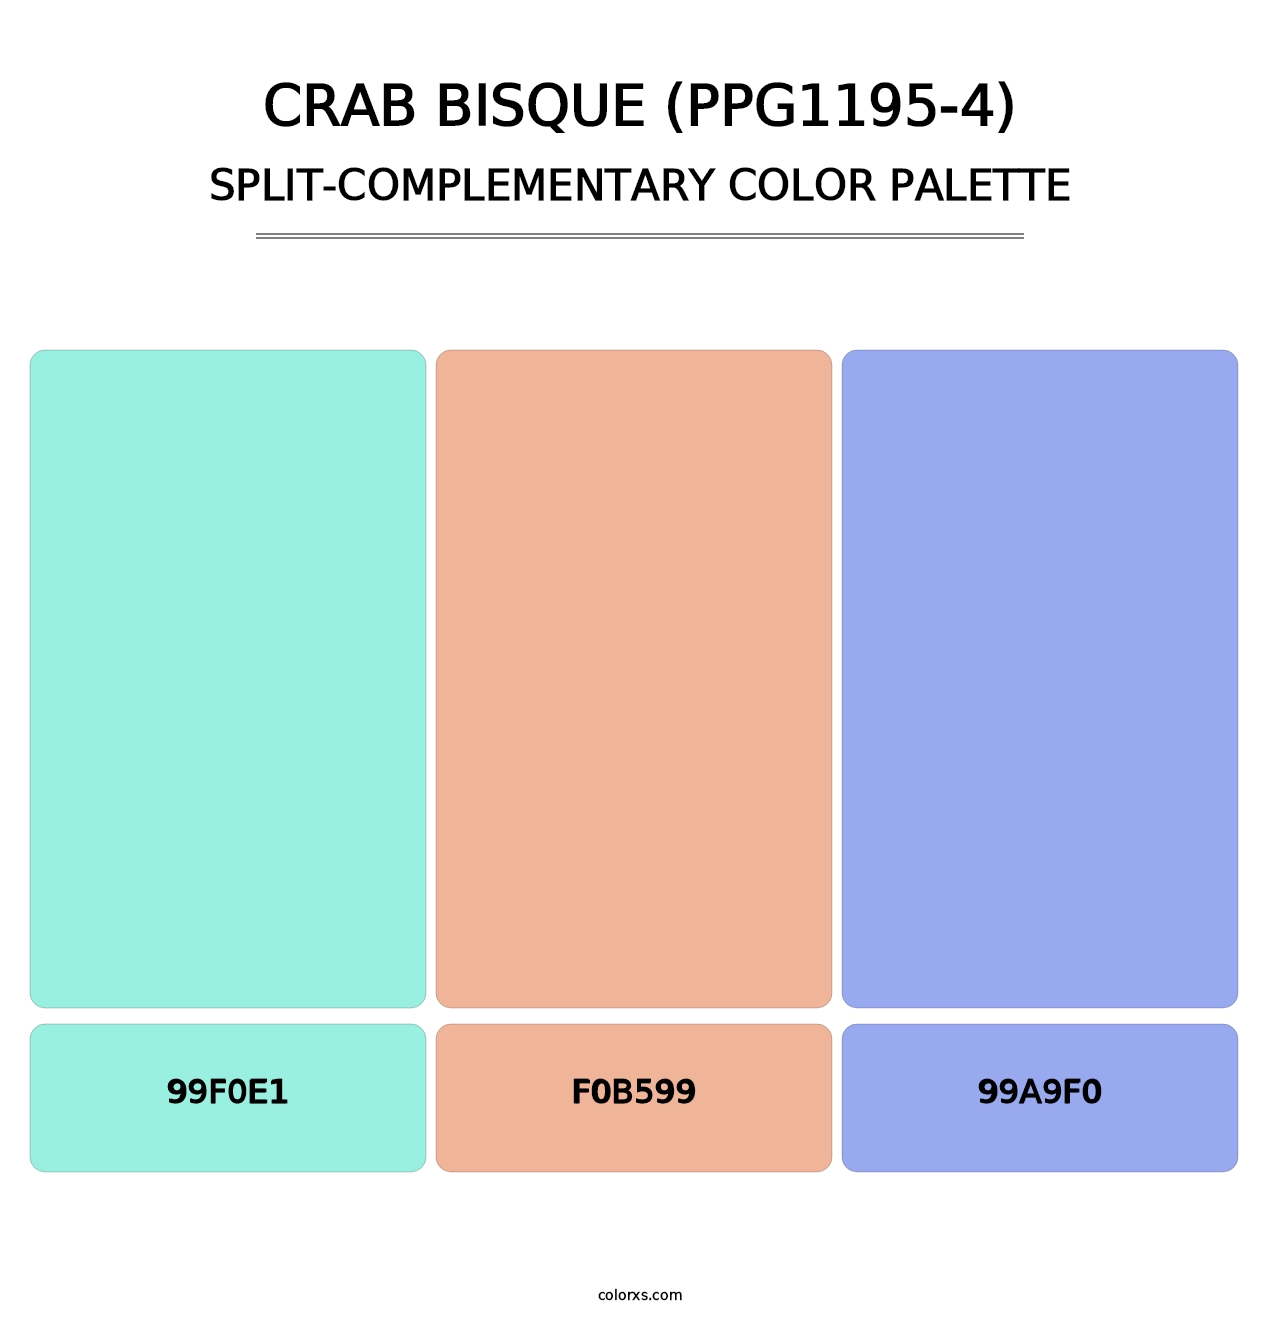 Crab Bisque (PPG1195-4) - Split-Complementary Color Palette